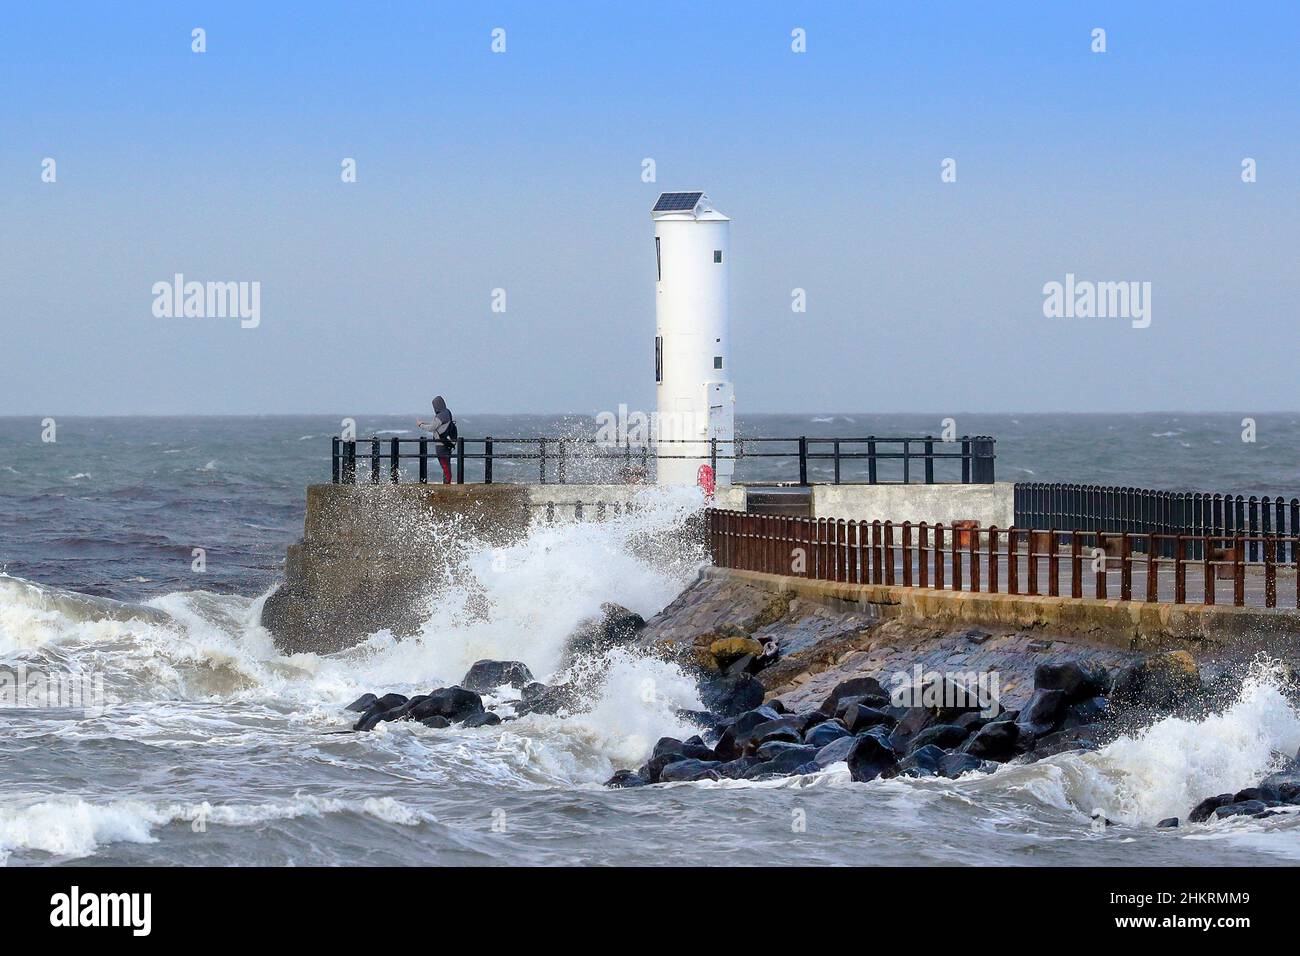 Lighthouse at the end of the pier, Ayr, Ayrshire, Scotland with high waves against the wall from the Firth of Clyde Stock Photo